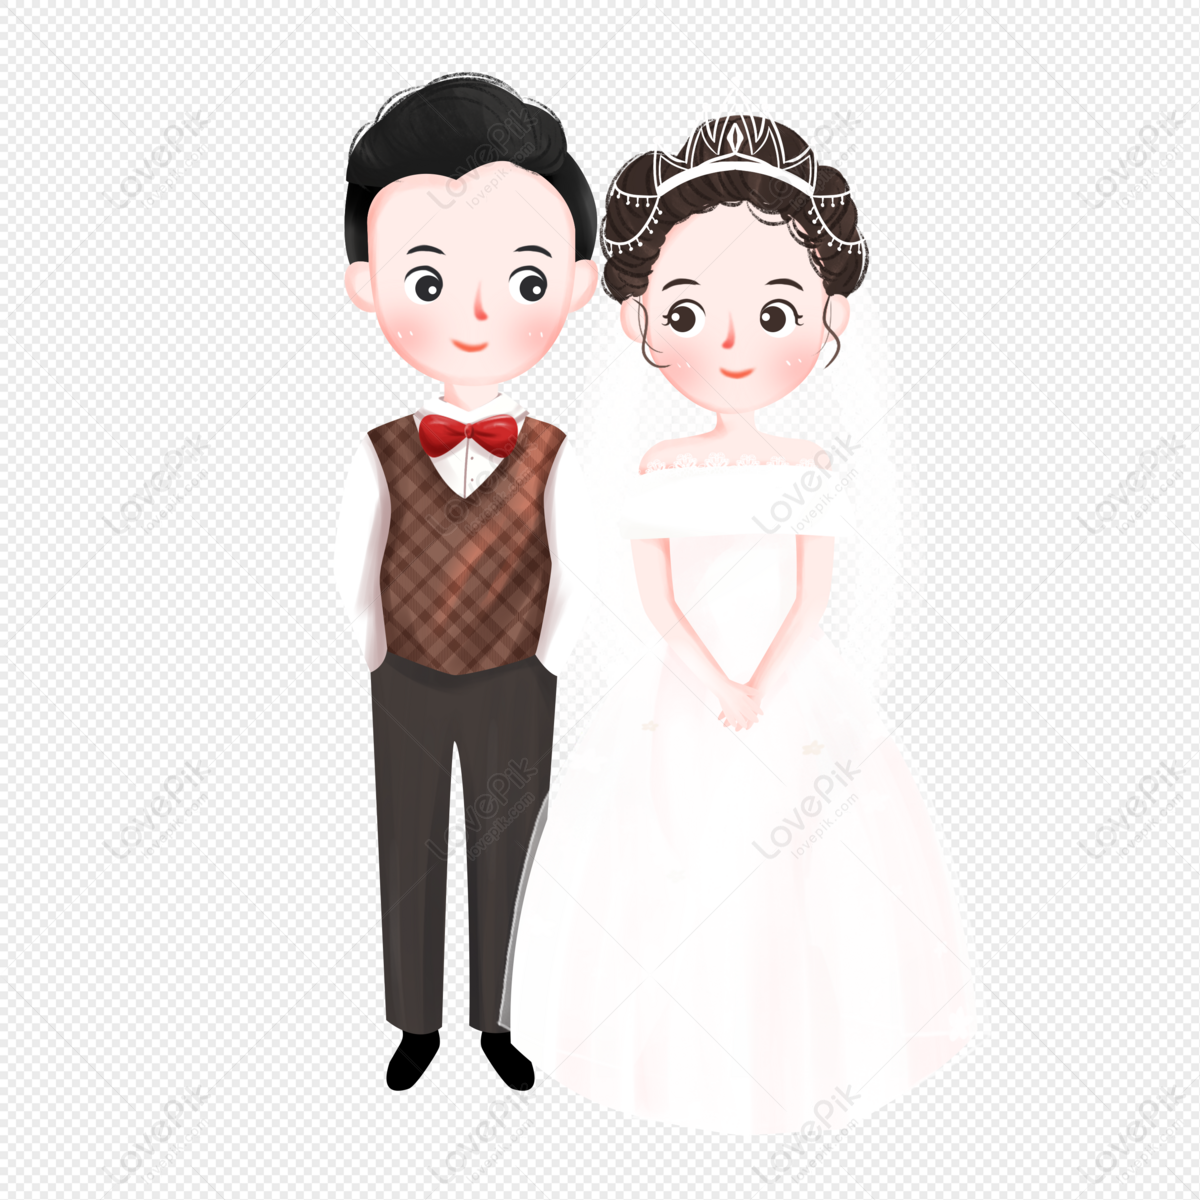 Valentines Day Hand Drawn Married Cartoon Bride And Groom PNG Image Free  Download And Clipart Image For Free Download - Lovepik | 401896691